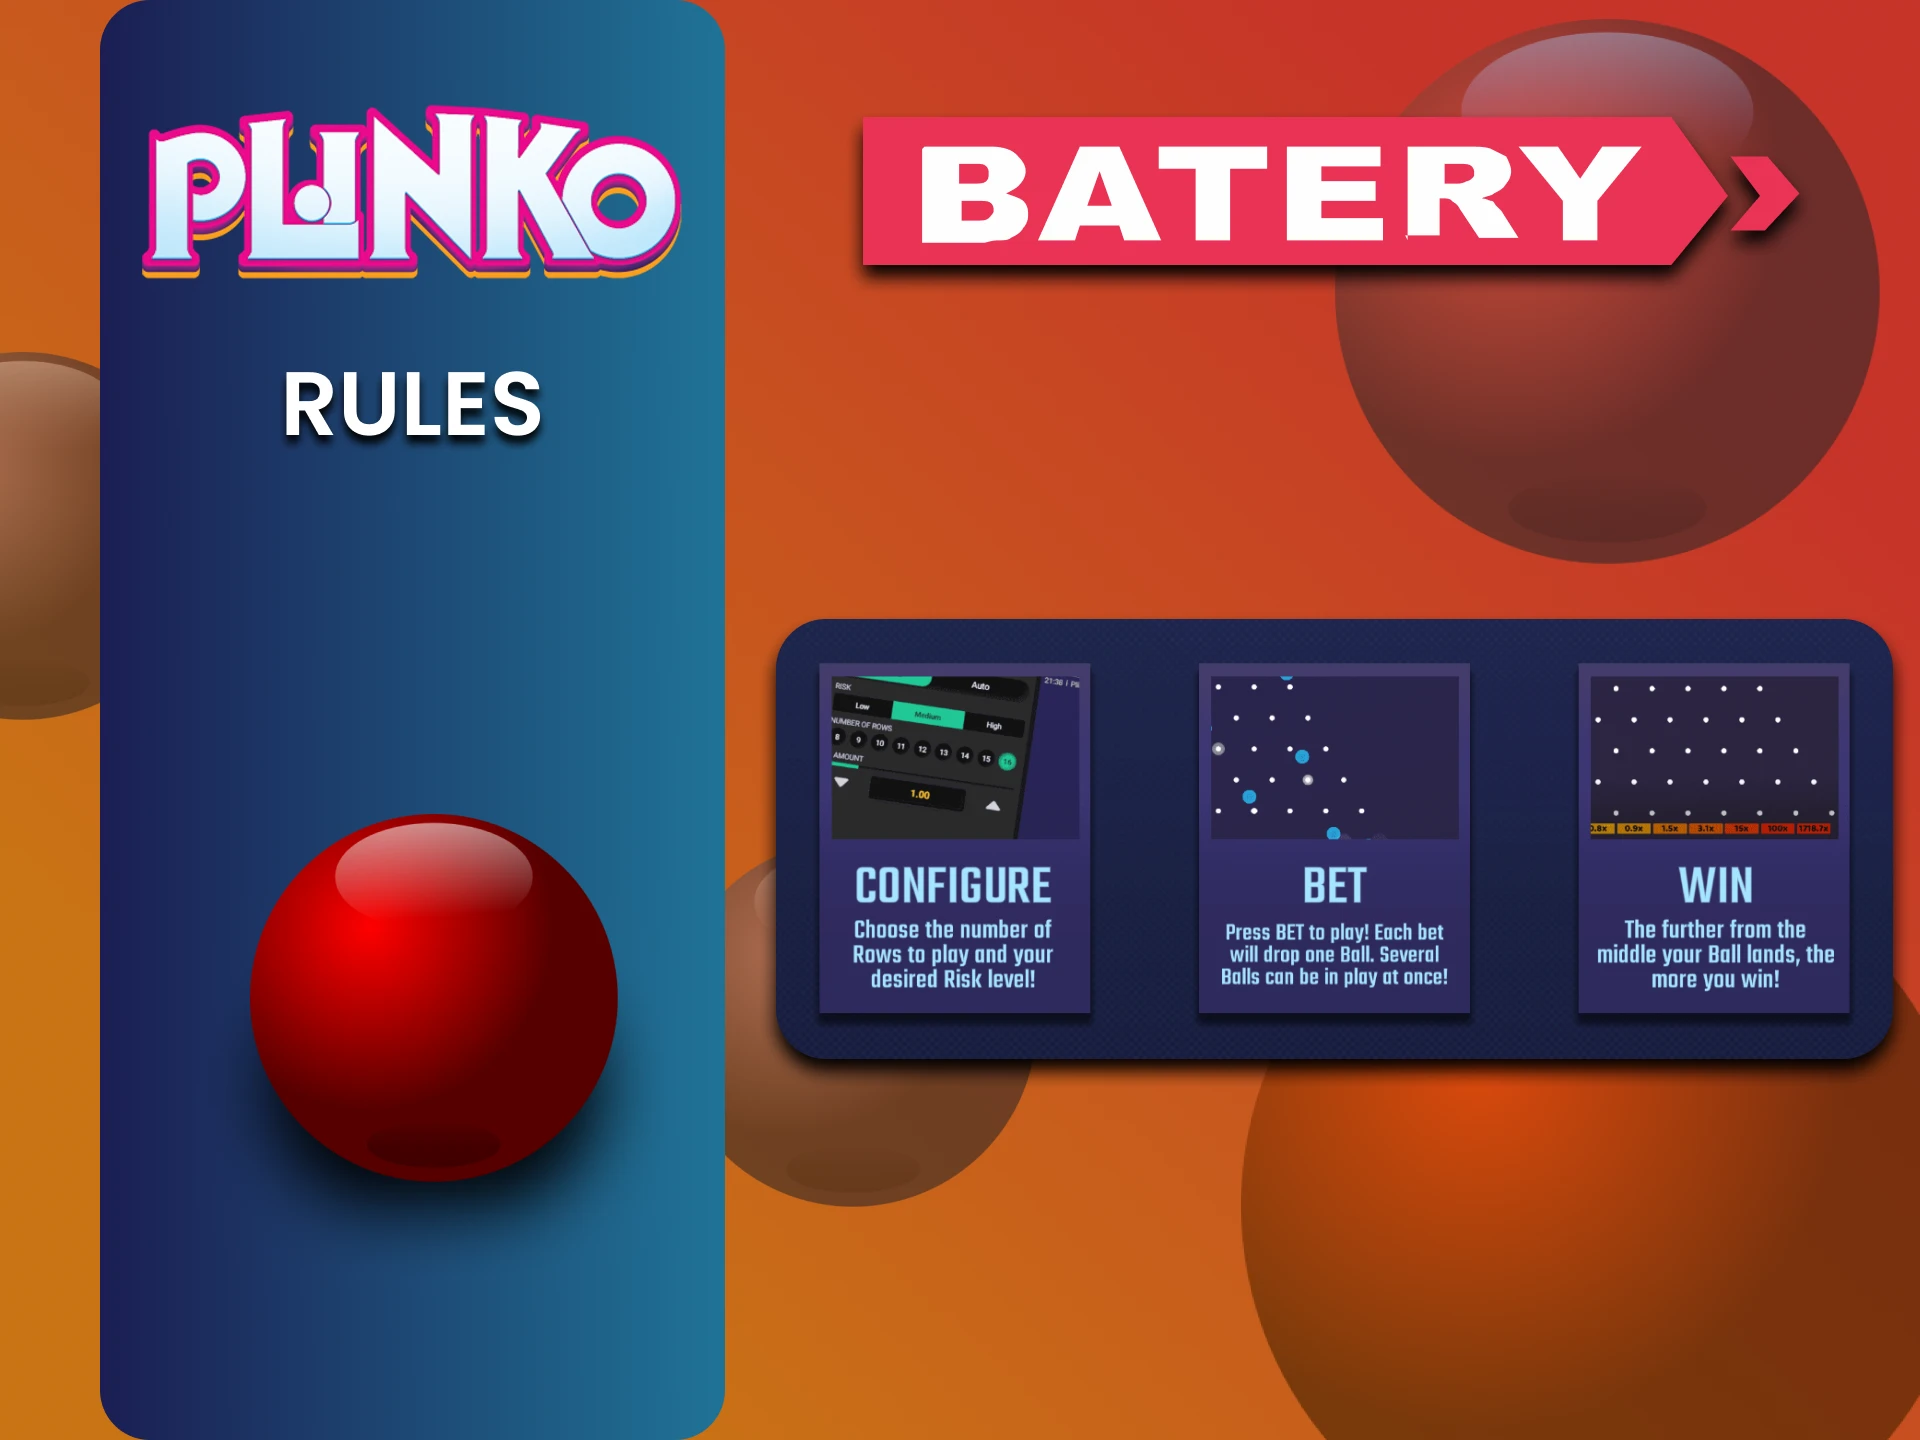 Before playing Plinko, study its rules on the Batery website.